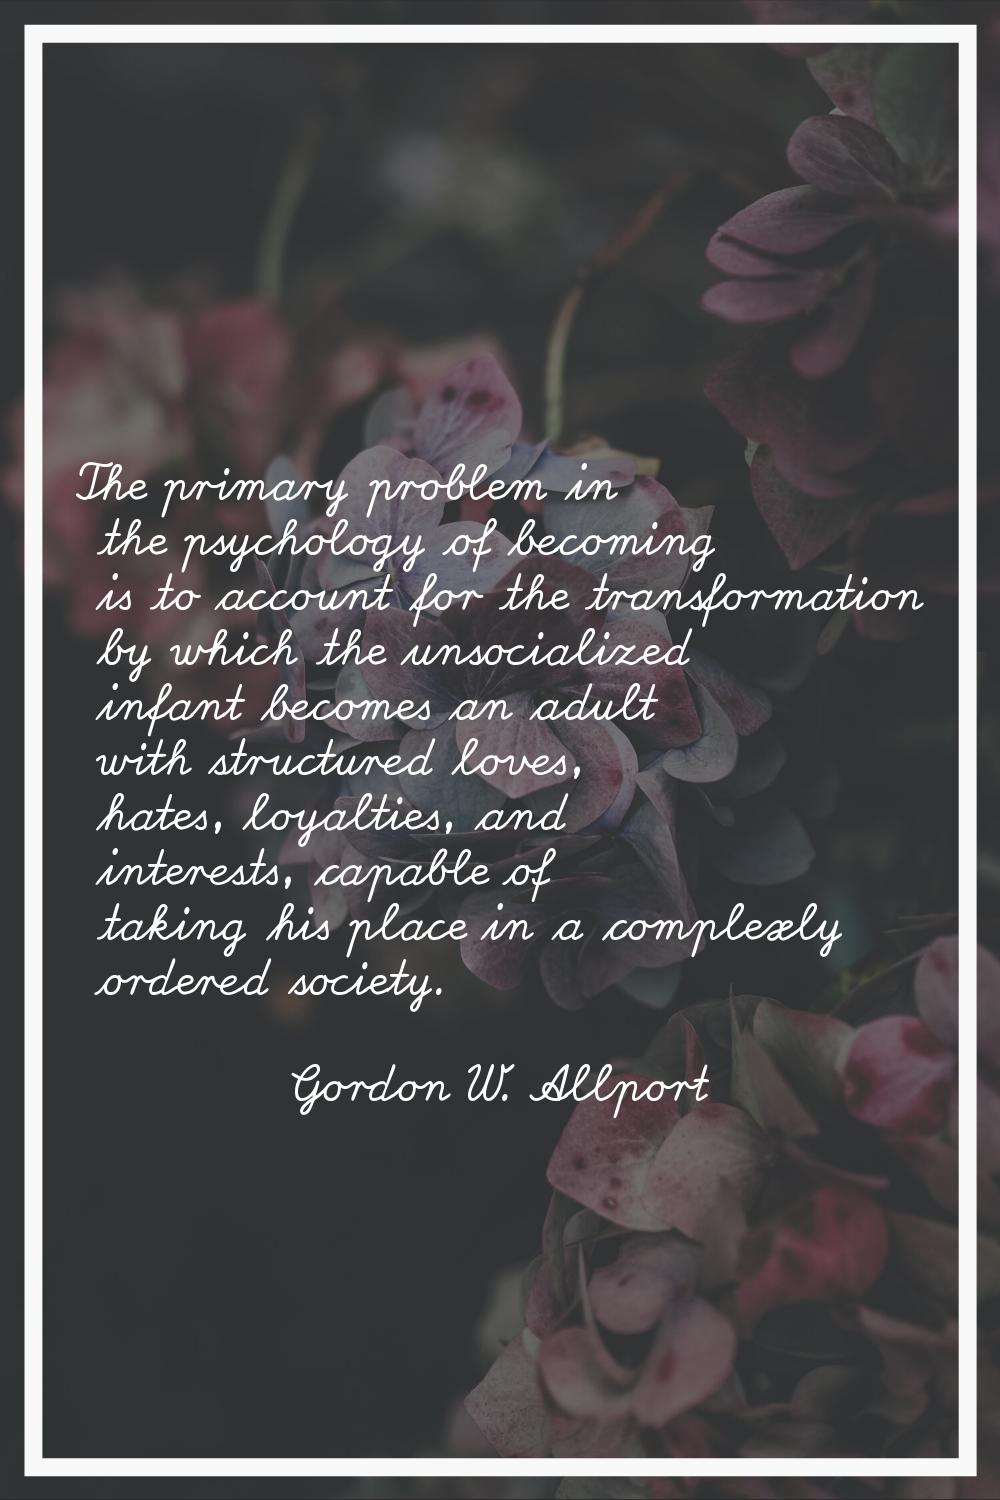 The primary problem in the psychology of becoming is to account for the transformation by which the